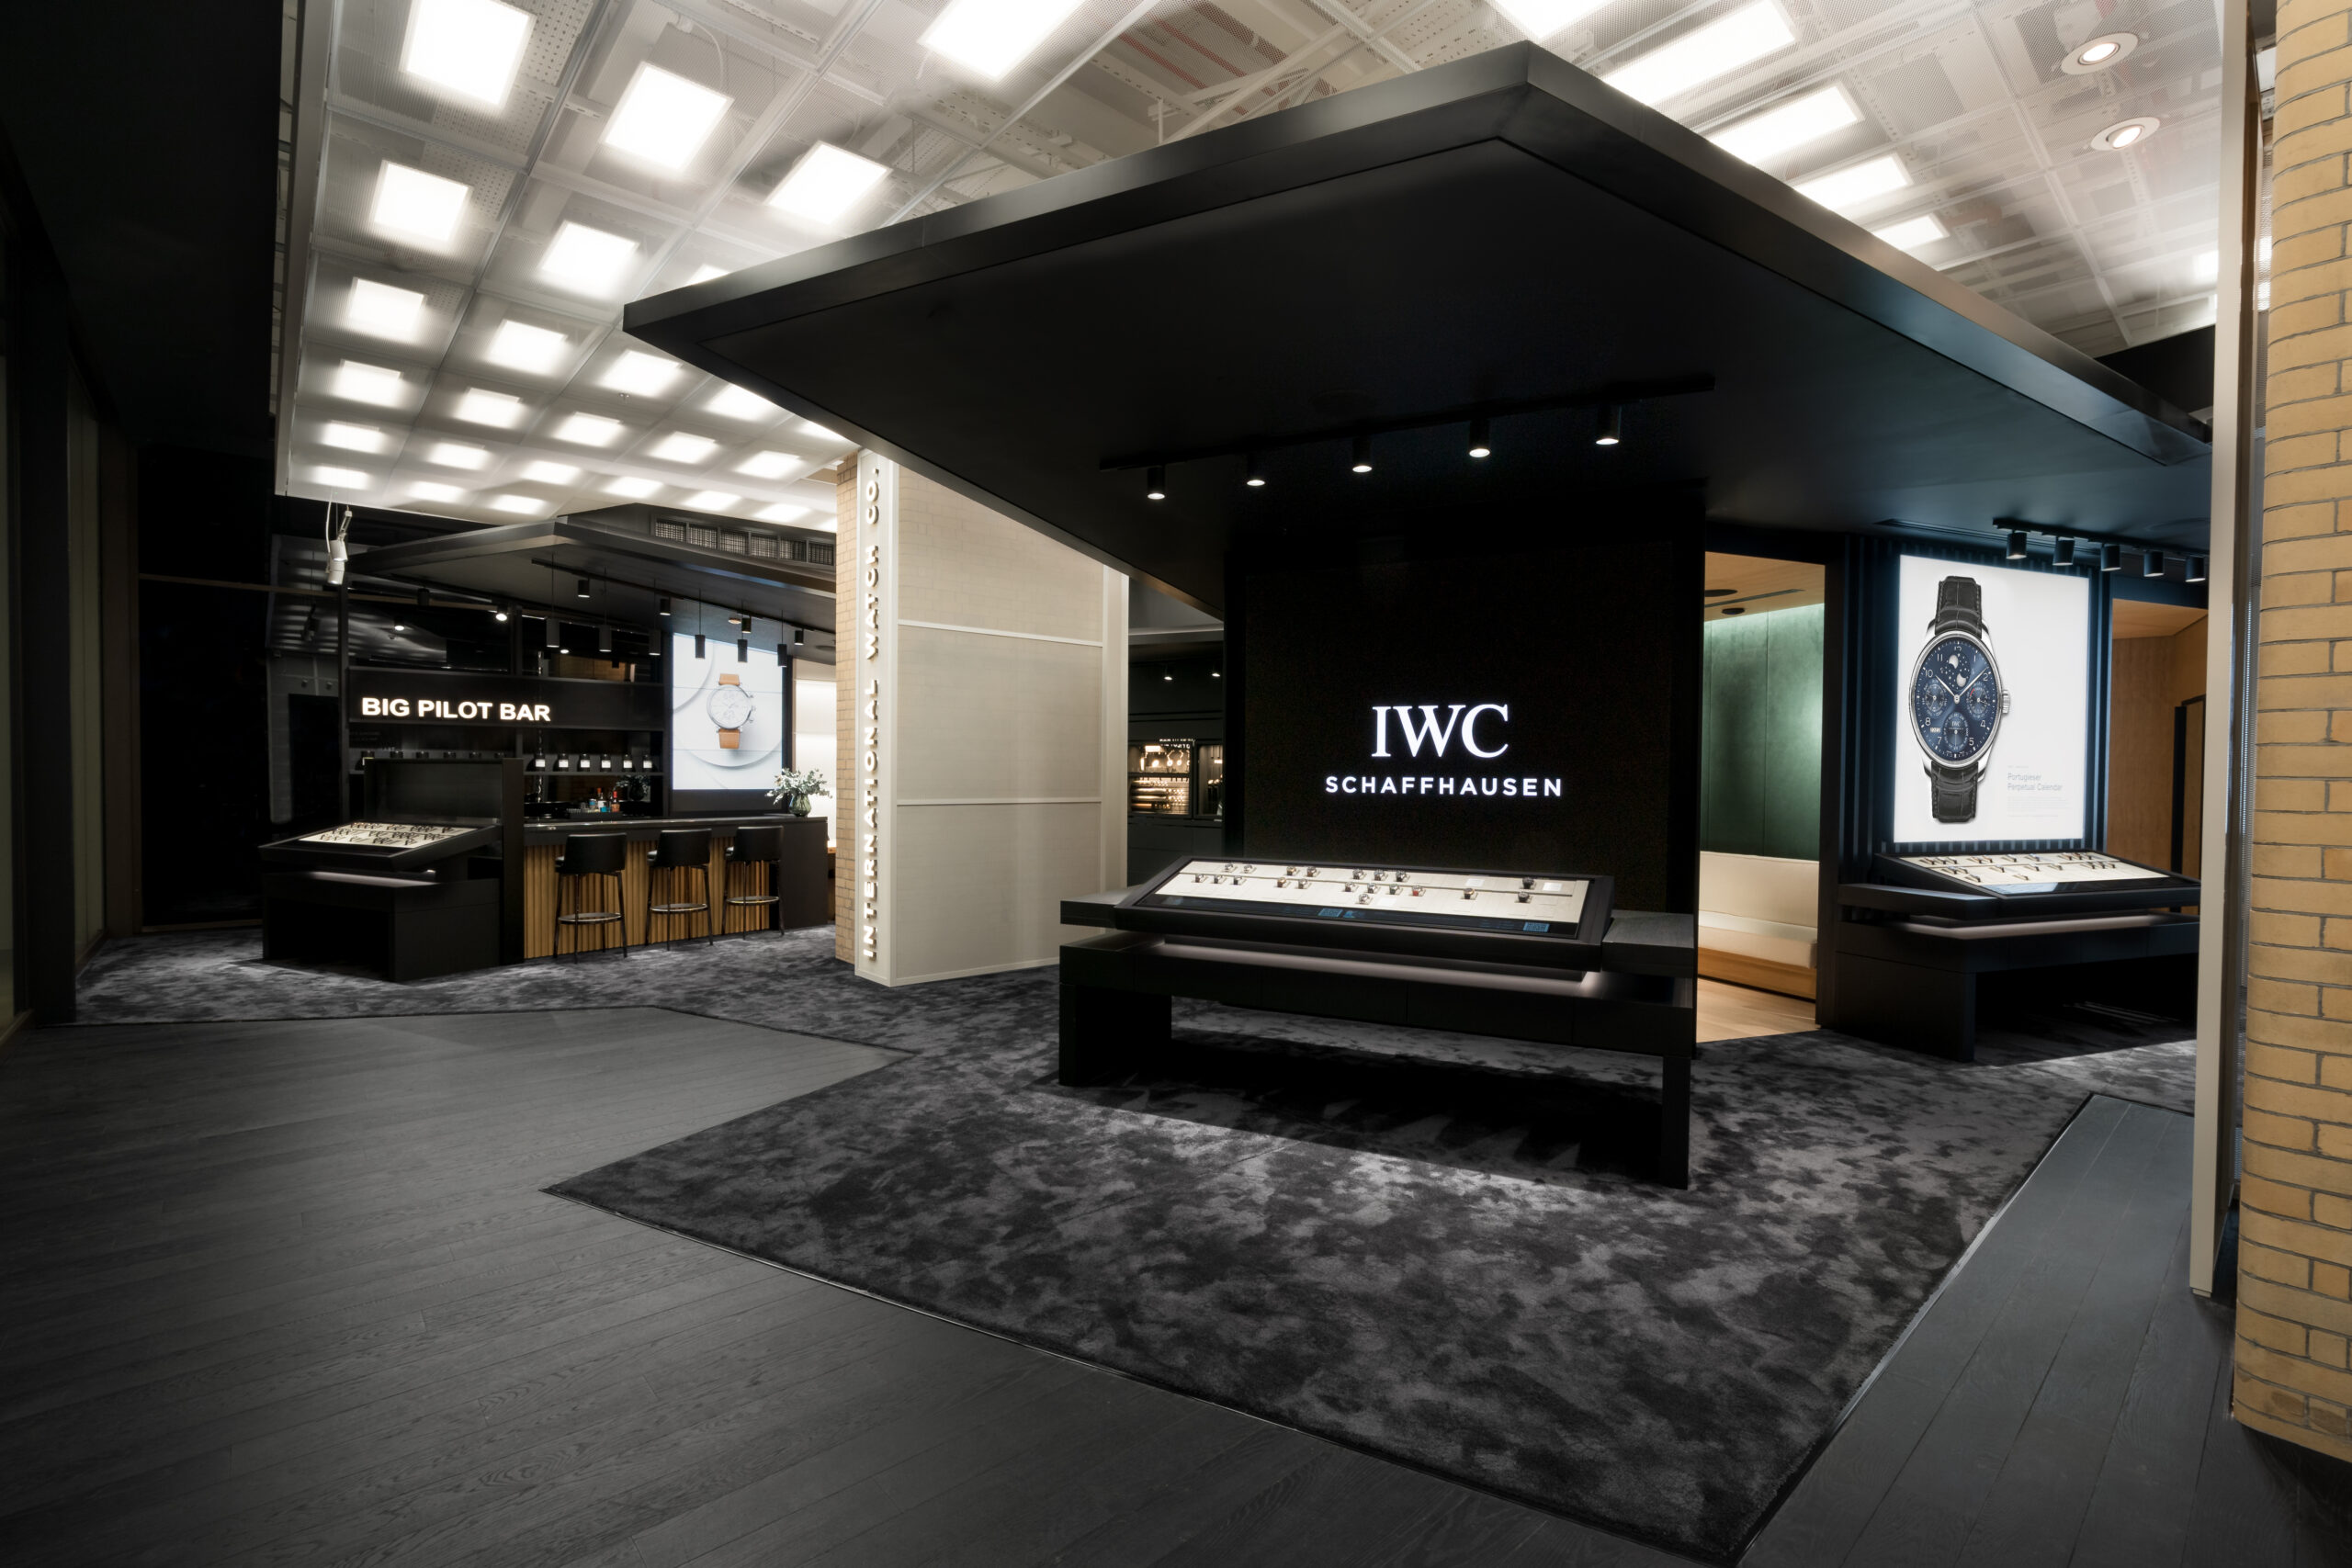 Iwc iwc boutique battersea 7 scaled